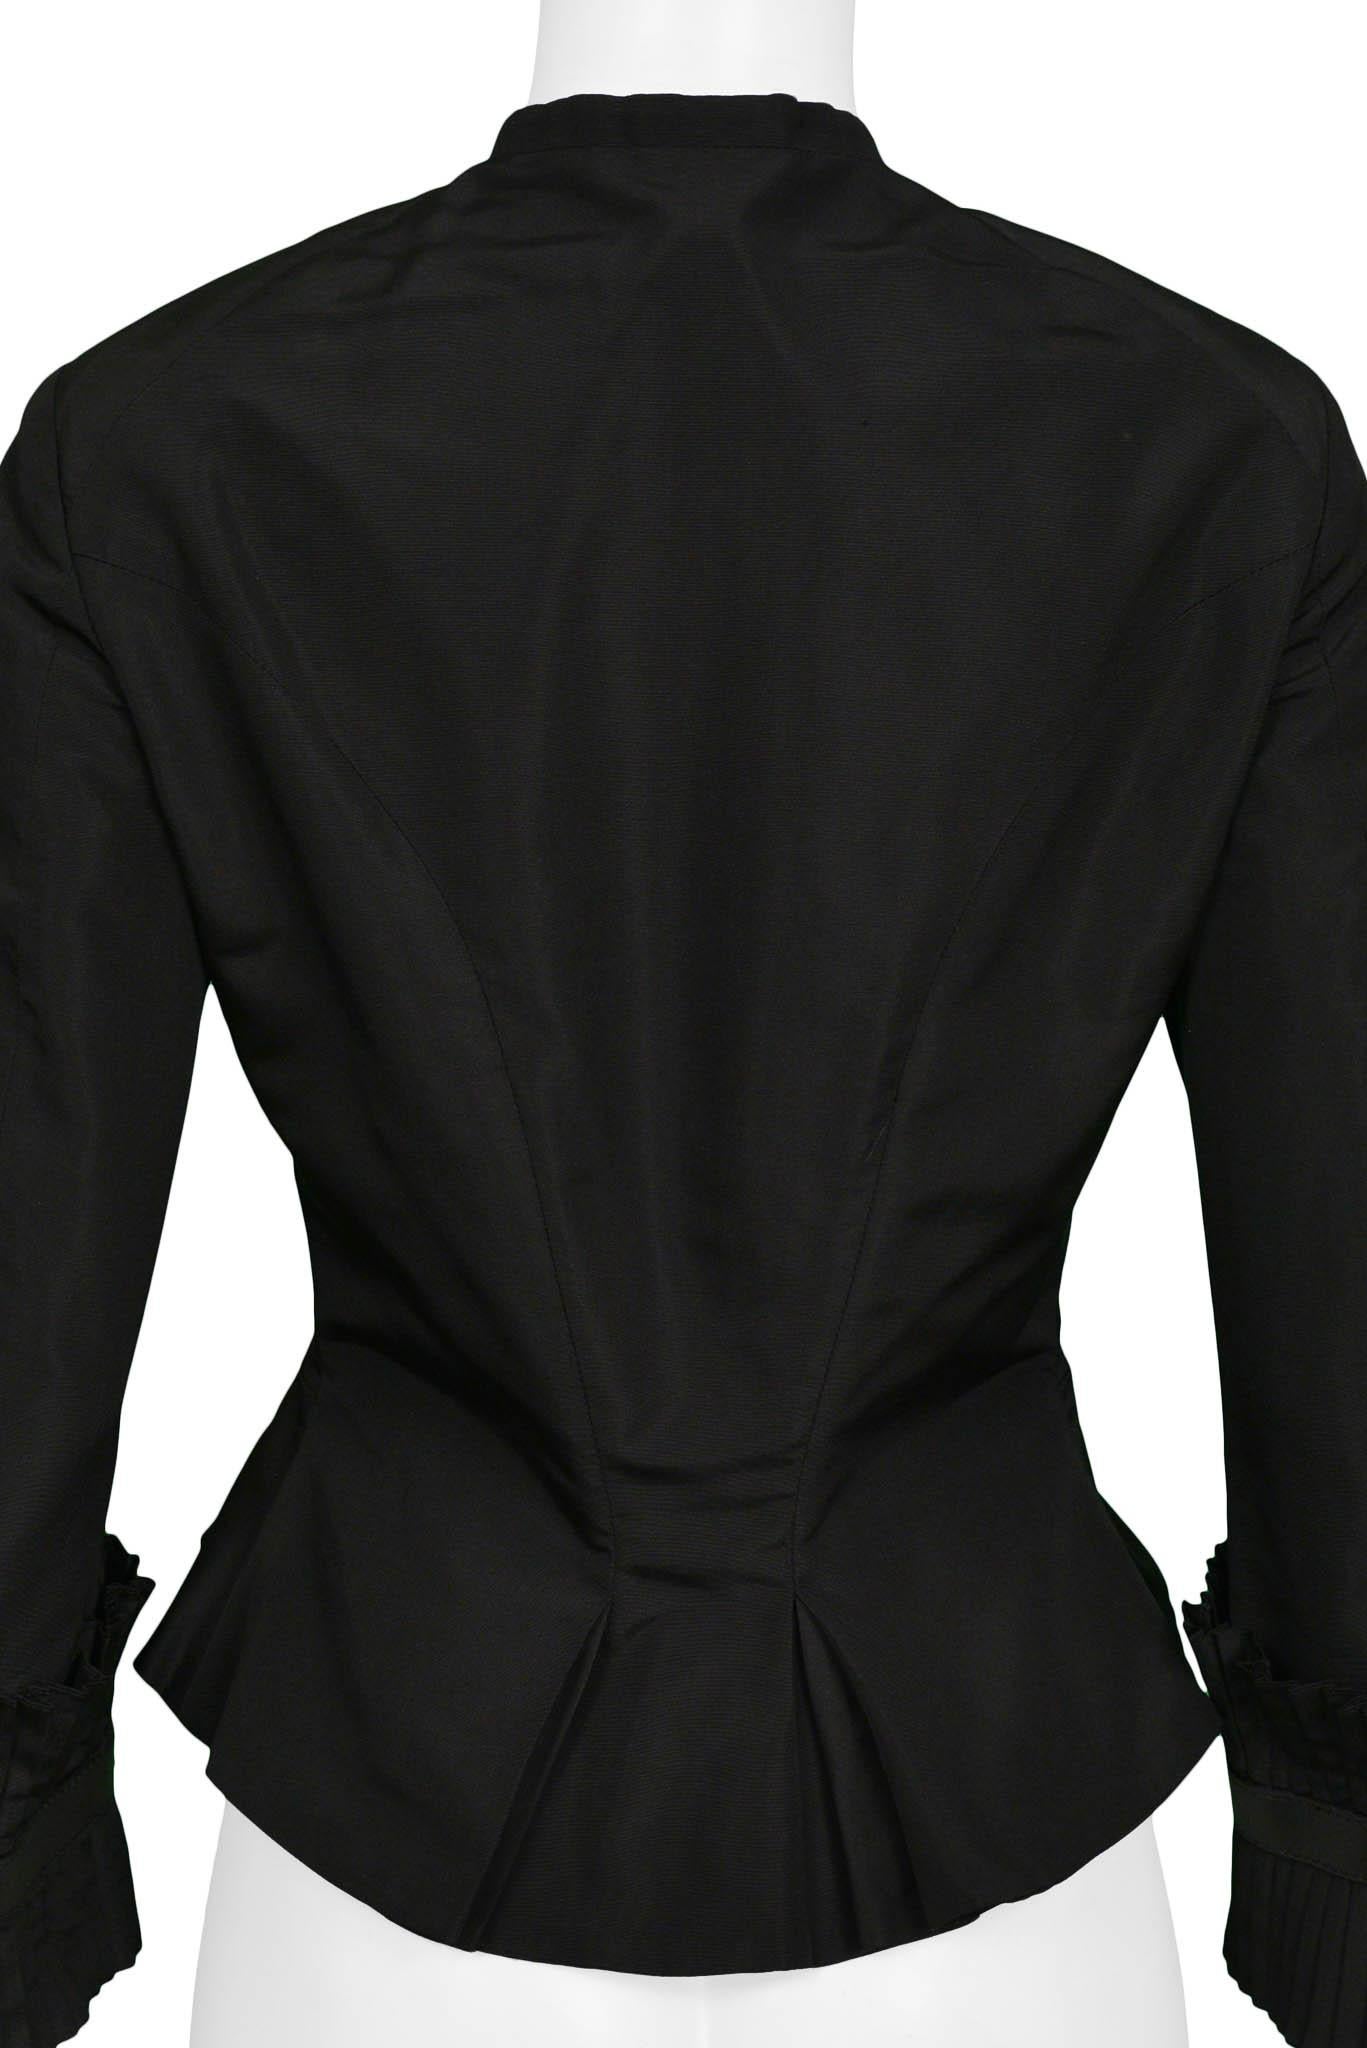 Alexander Mcqueen Black taffeta Jacket With Pleated Sleeves AW 2002 1